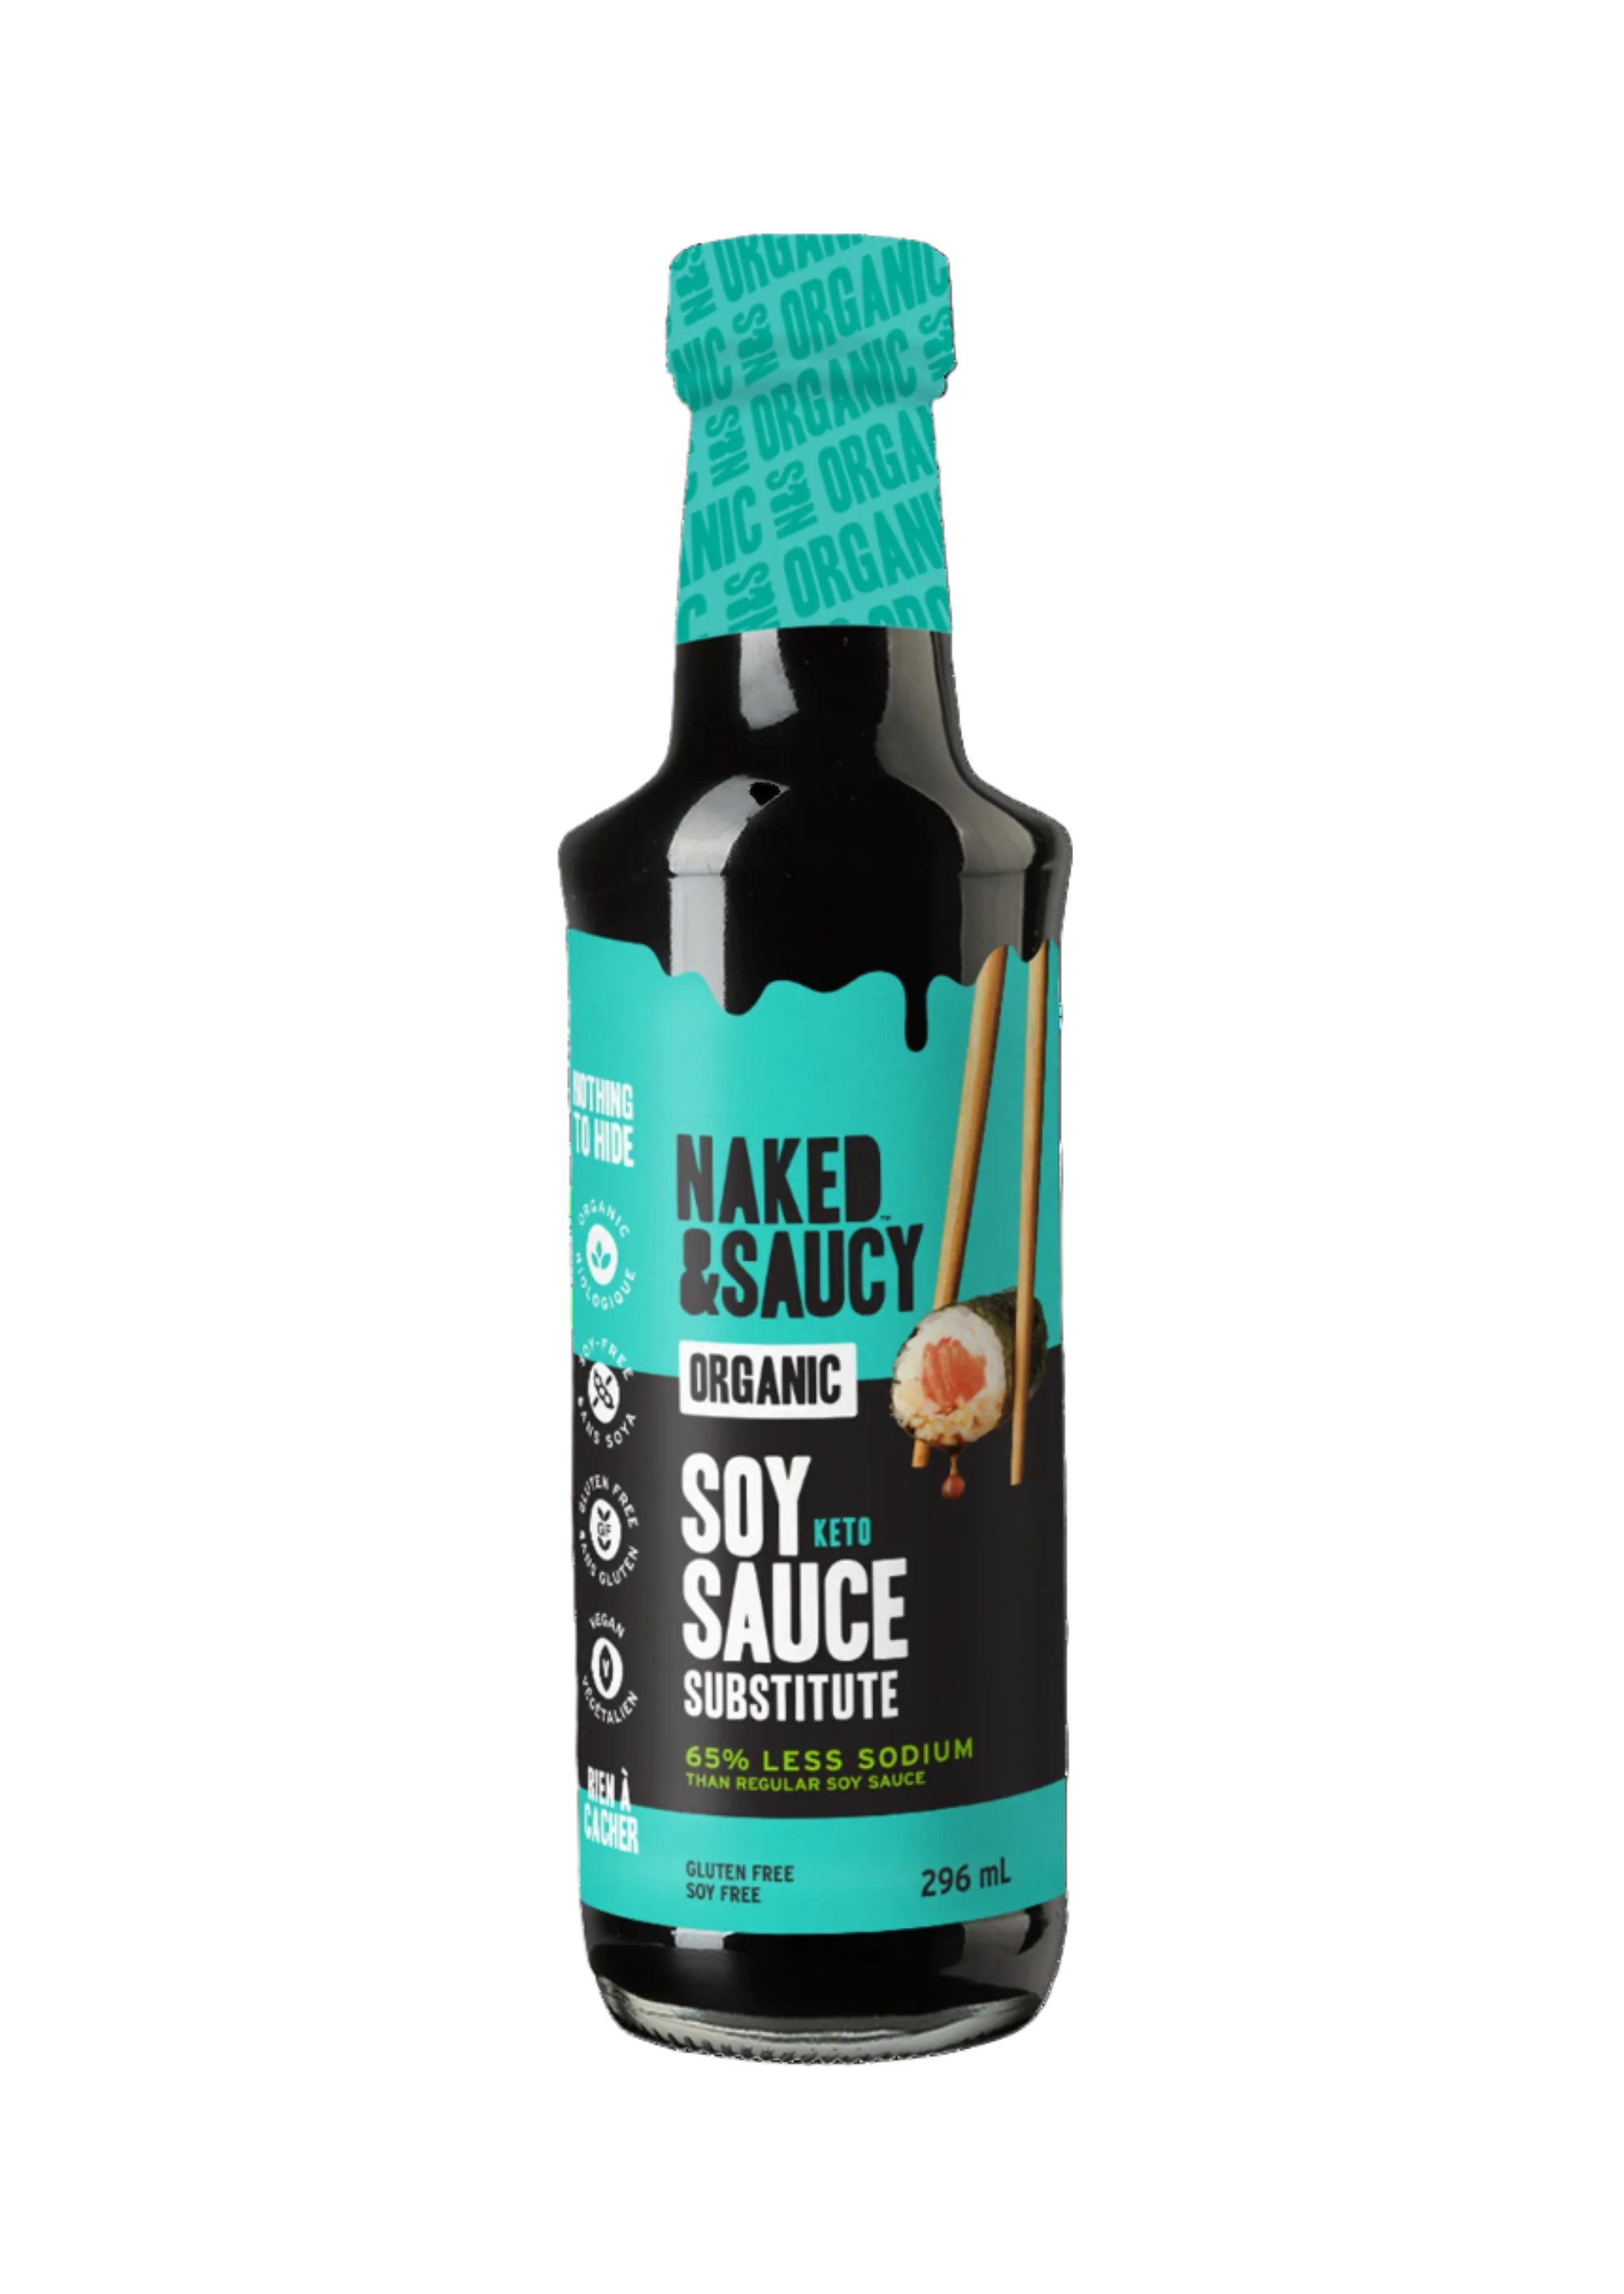 Naked and Saucy Soy Sauce Substitute (Coconut Aminos - KETO)